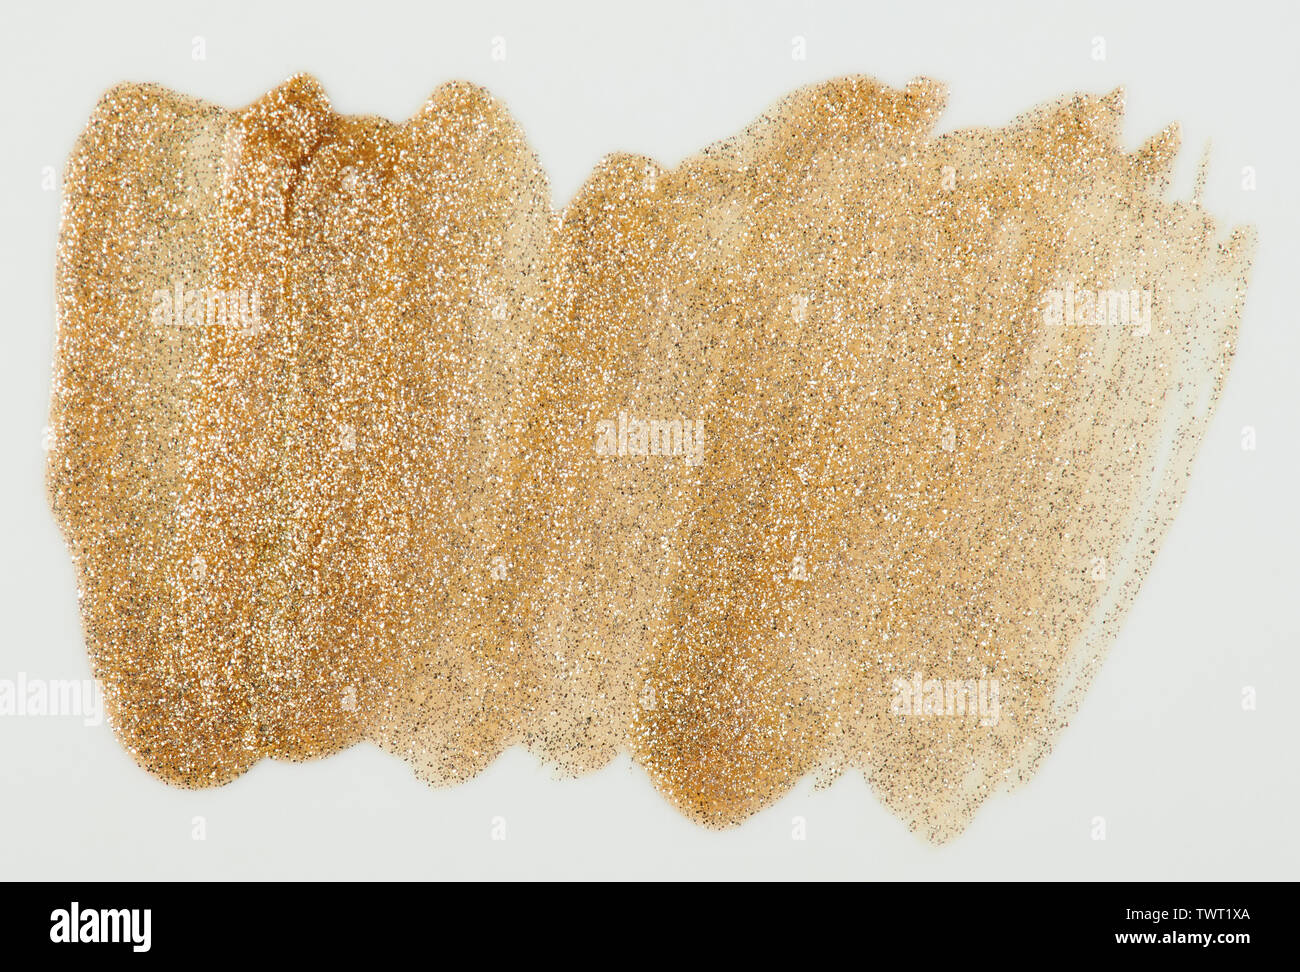 Sparkle gold color paint stain isolated on white background close up view Stock Photo